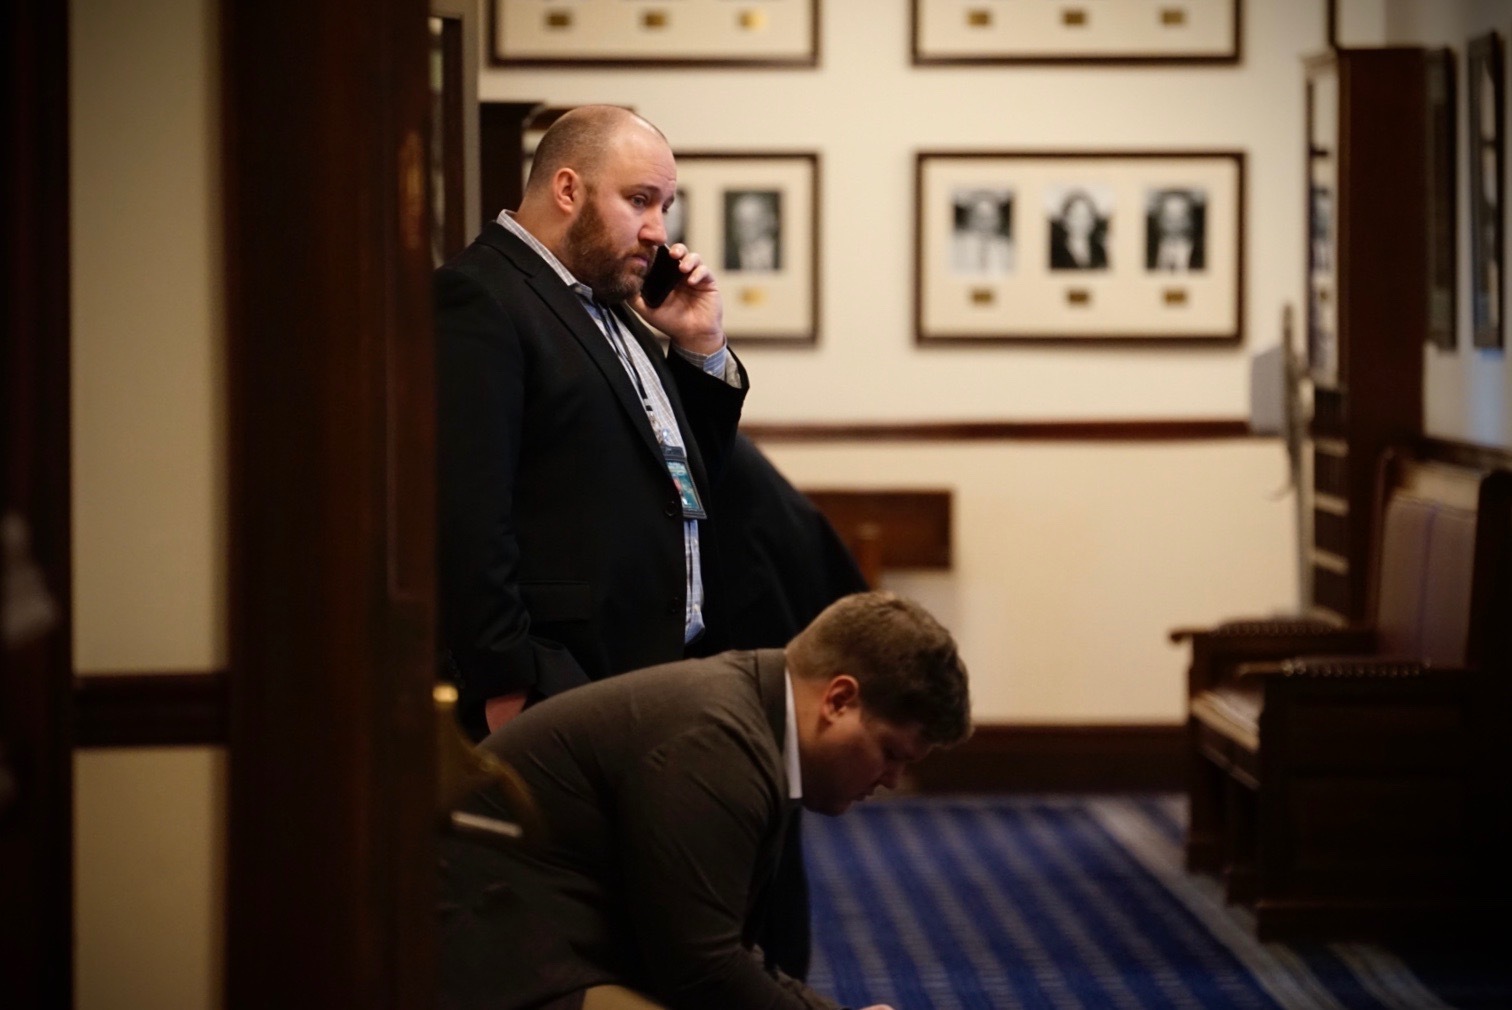 Jeff Landfield, founder of the Alaska Landmine at work at the Capitol in 2020. (Photo courtesy Brian Hild)